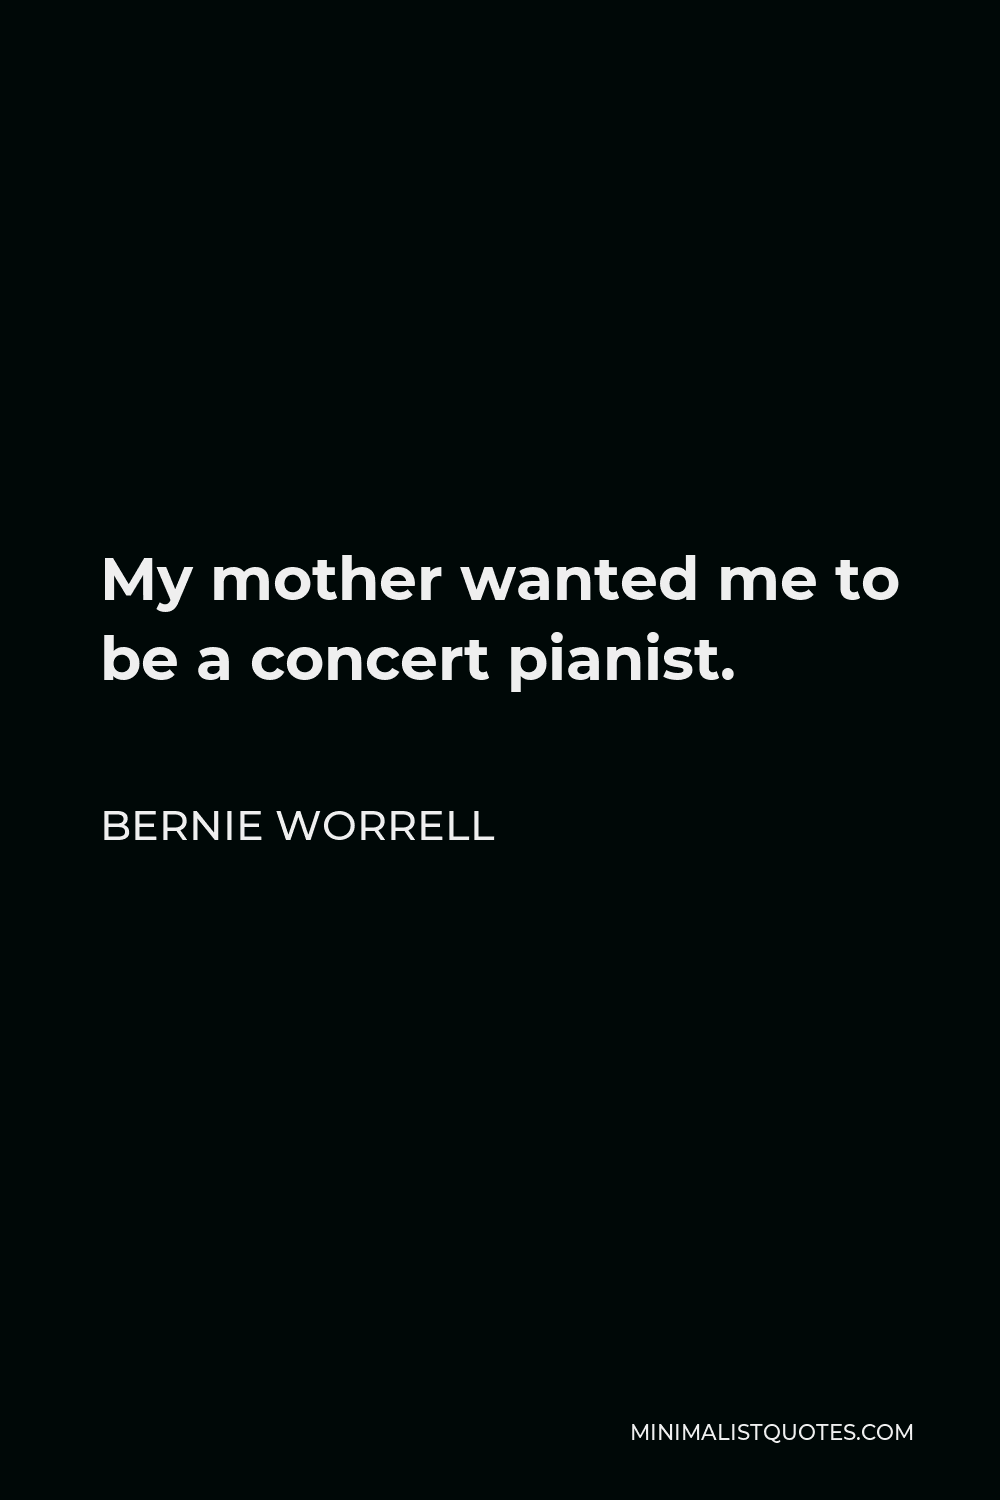 Bernie Worrell Quote - My mother wanted me to be a concert pianist.